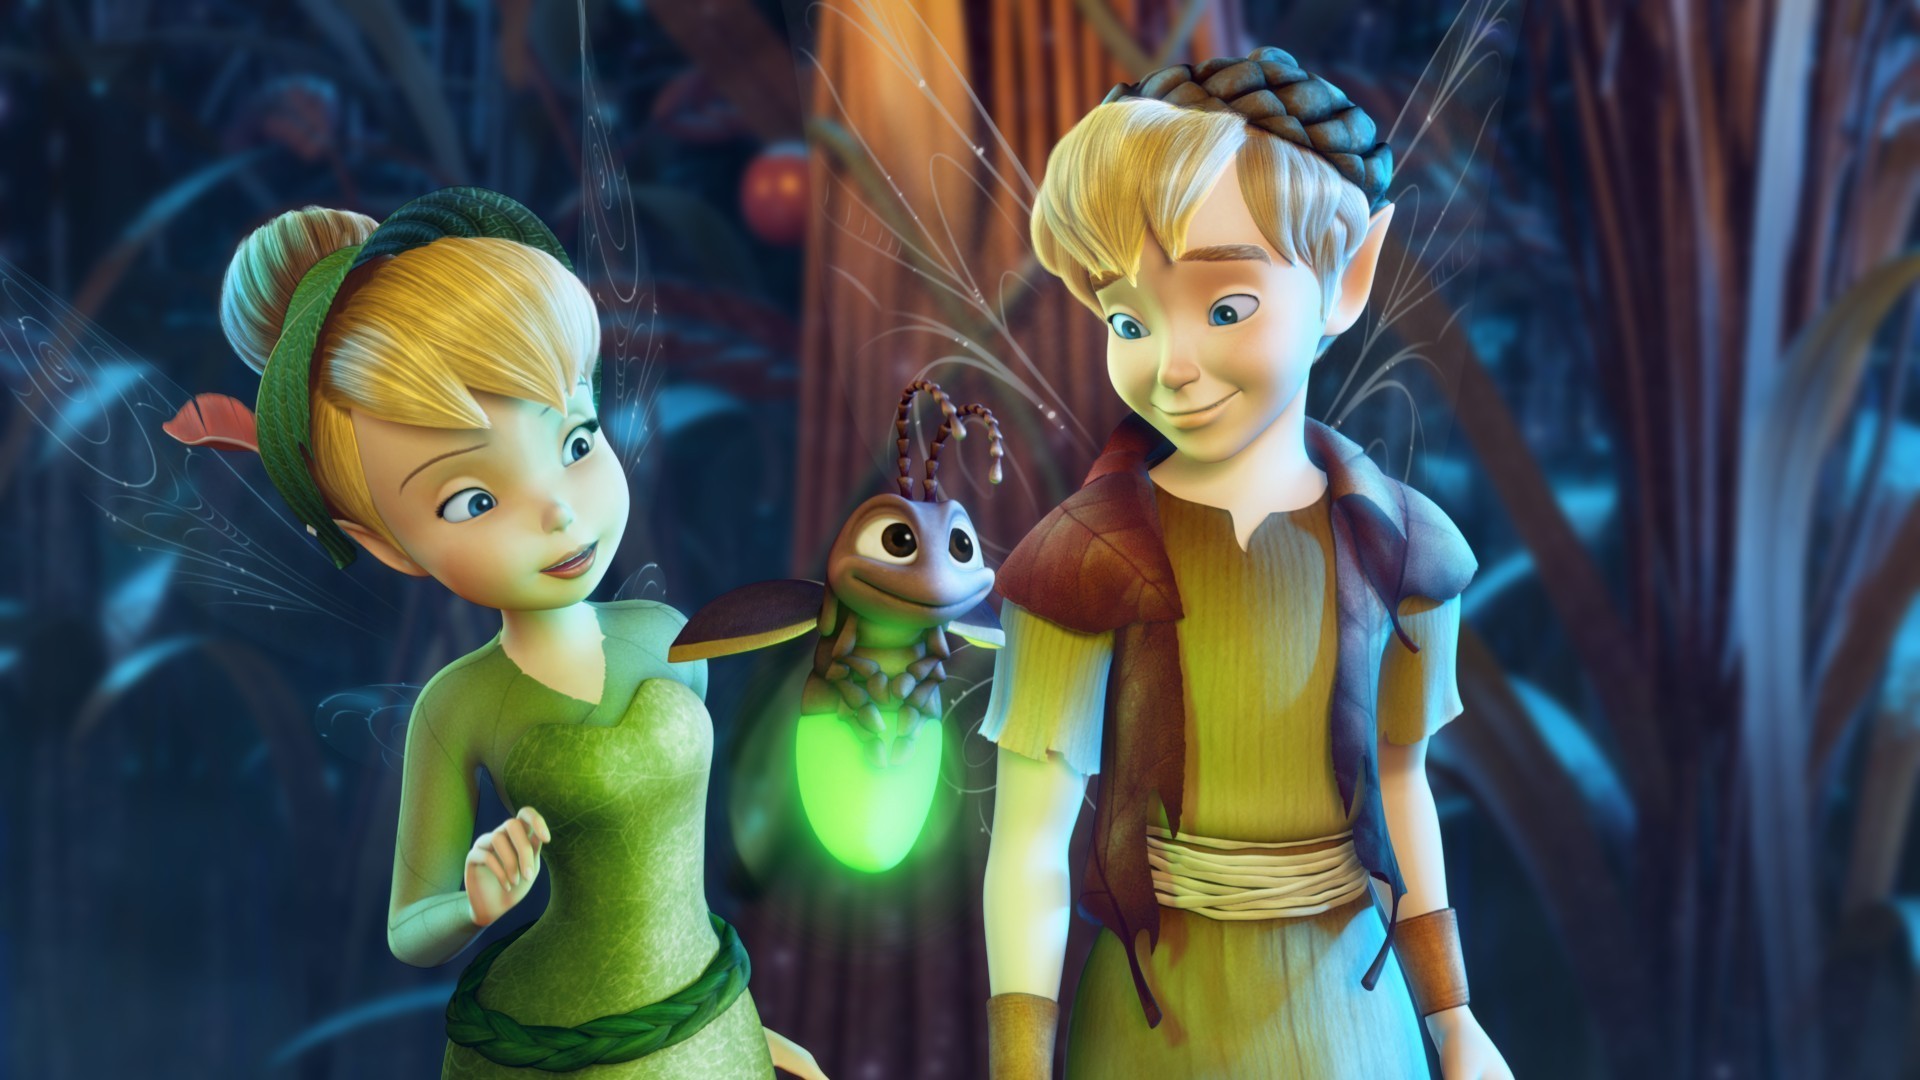 Family Film | Tinker Bell and the Lost Treasure